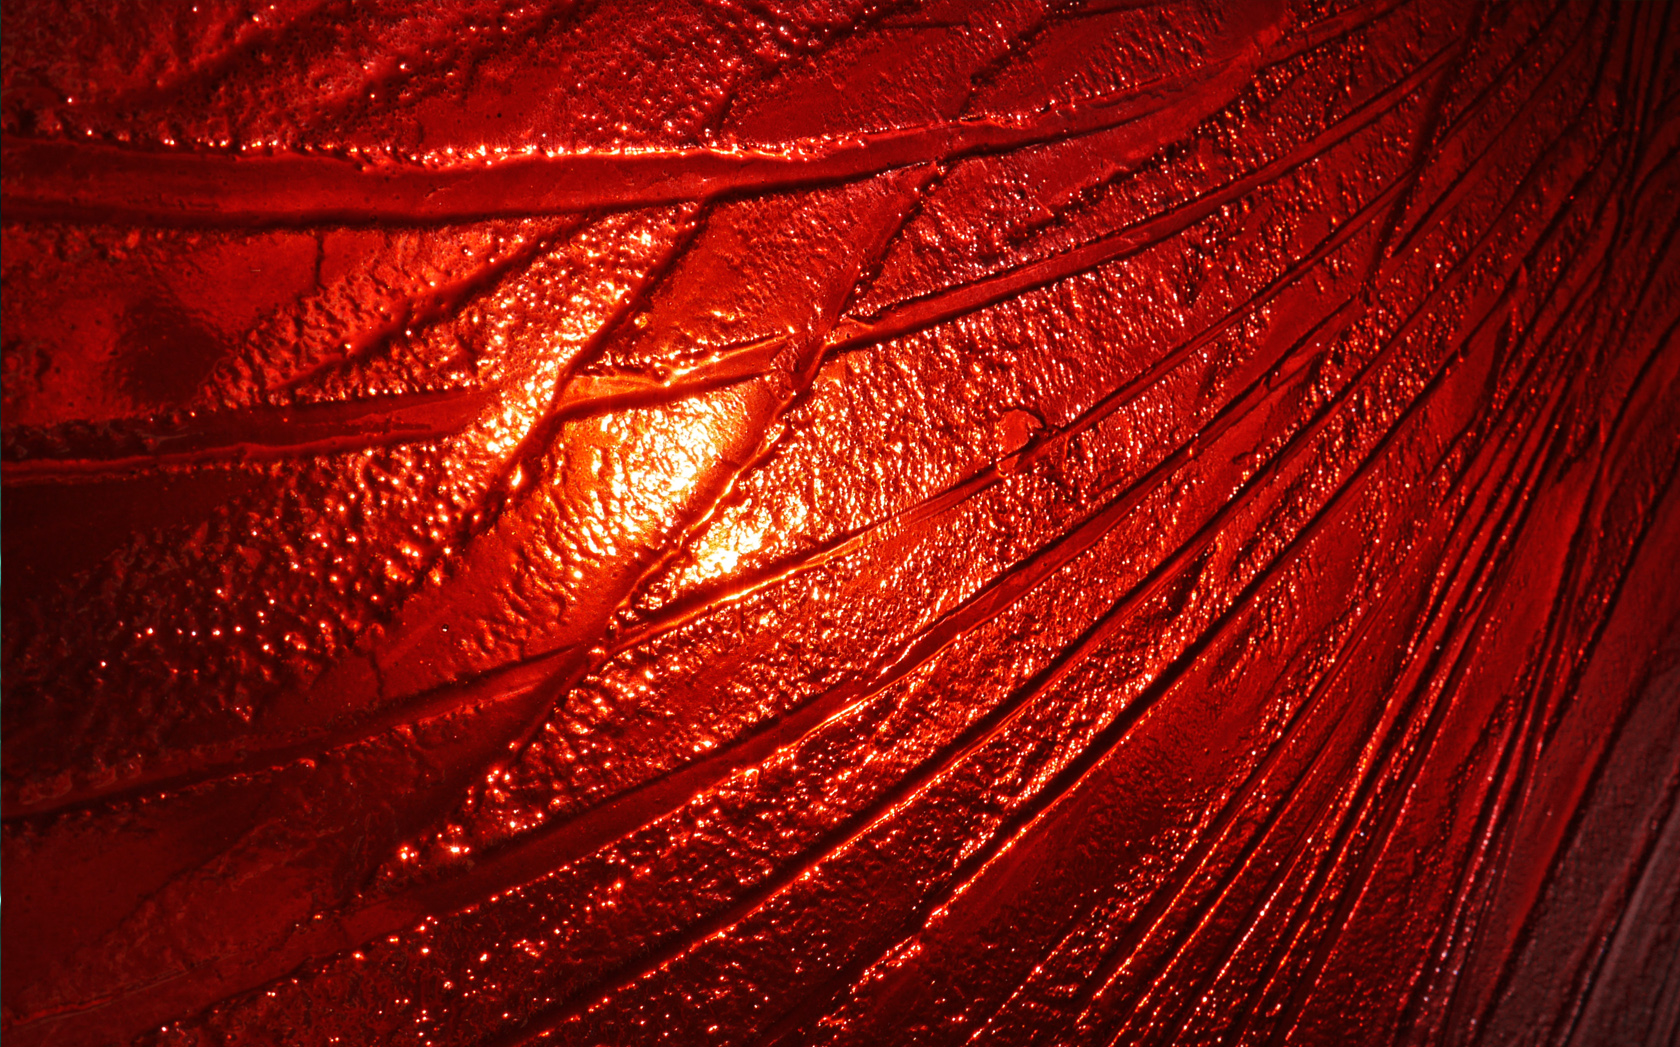 Wall Glass Art, a deep red hue shifting from burgundy to ruby kiln formed slumped glass autonomous artwork.